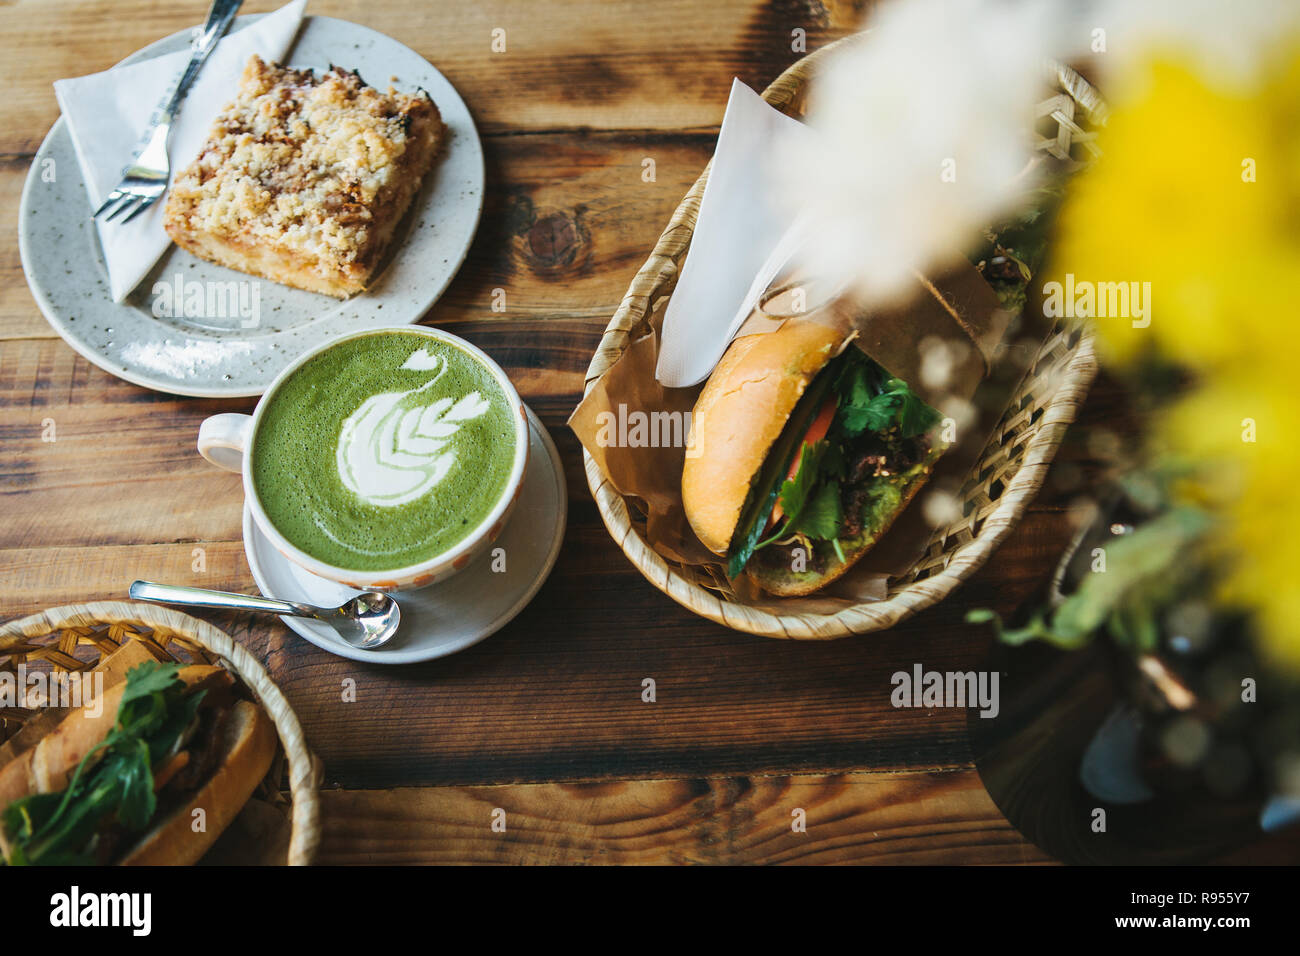 Healthy breakfast in the restaurant: cup of green tea with milk, dessert and two sandwiches with vegetables and herbs on wooden table Stock Photo